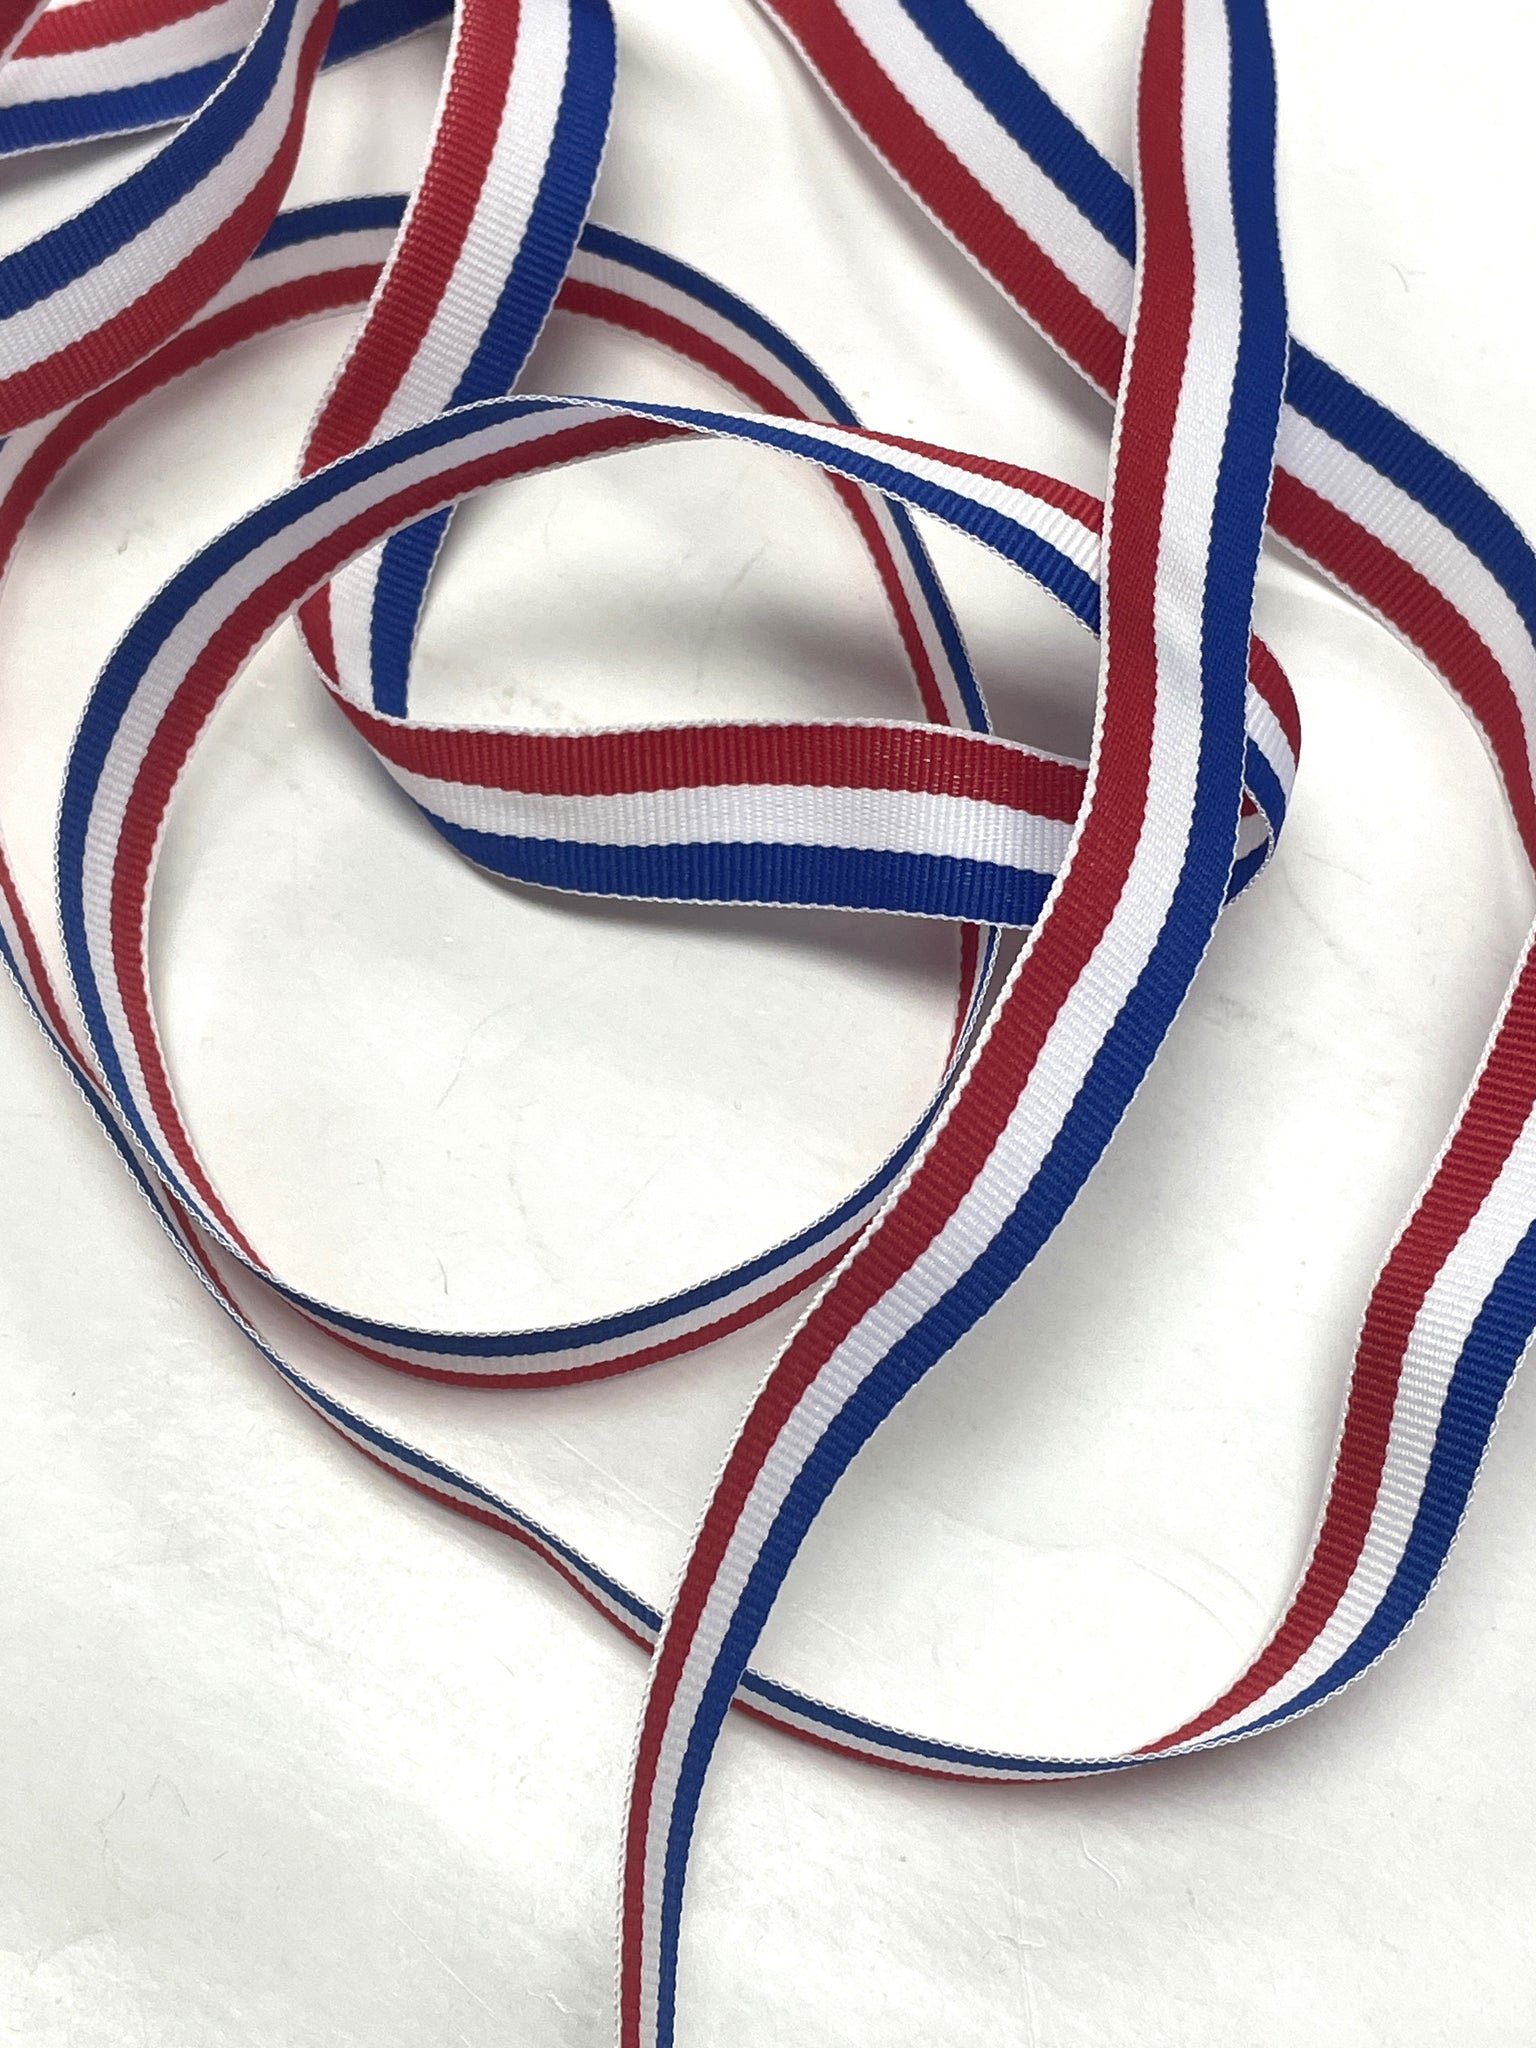 4 1/8 YD Polyester Grosgrain Ribbon - Red, White and Blue